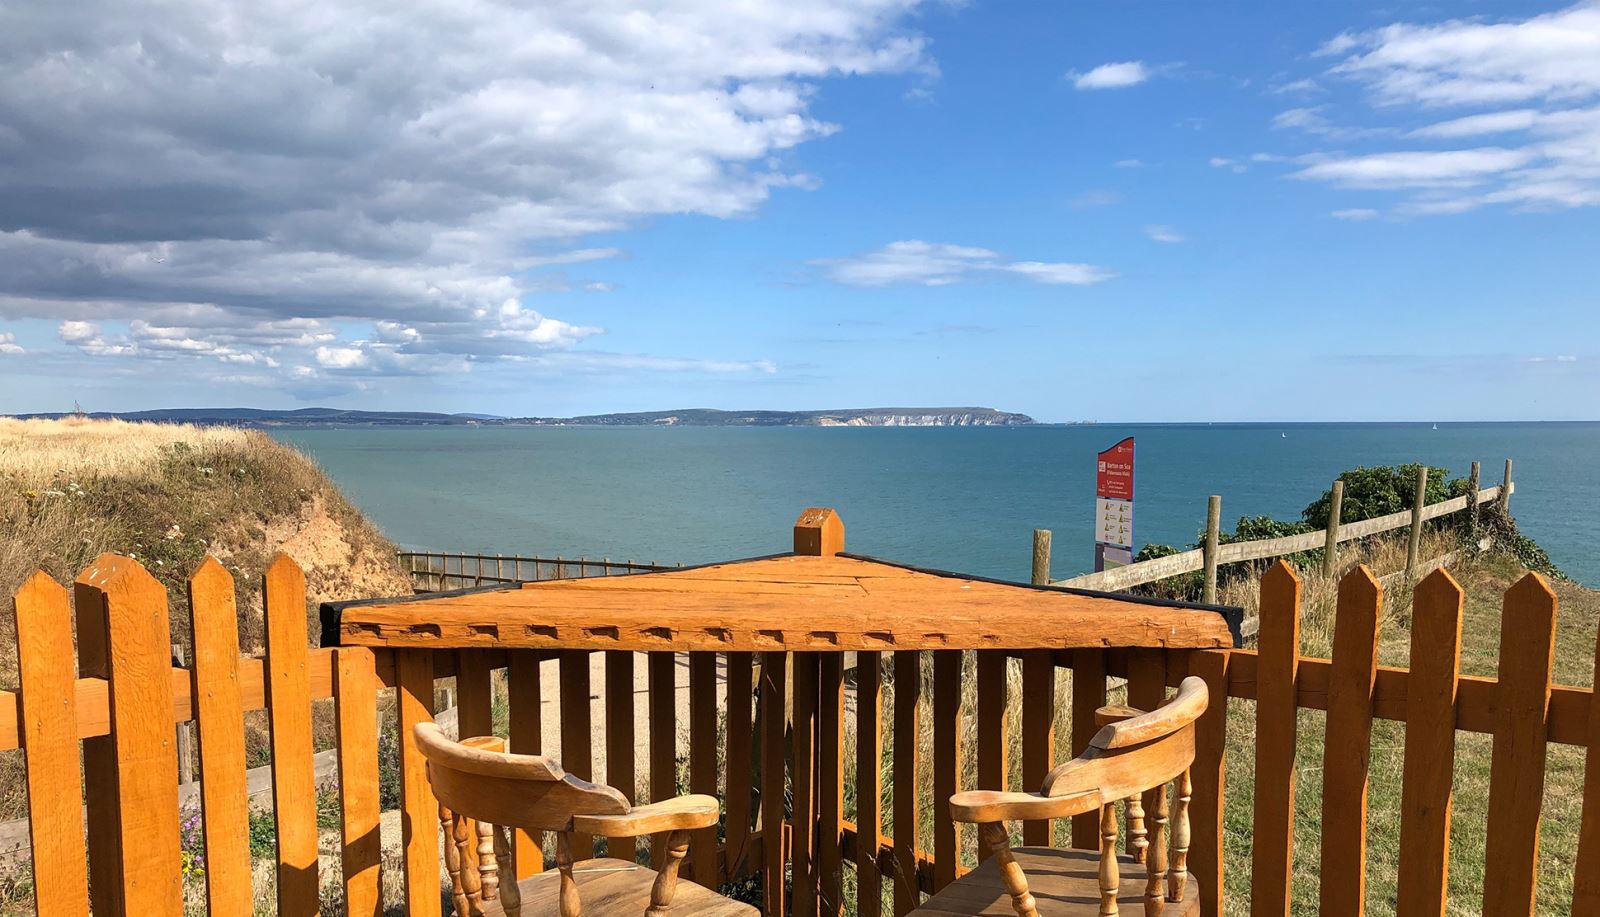 The view of the Solent from Beachcomber Cafe in Barton on Sea